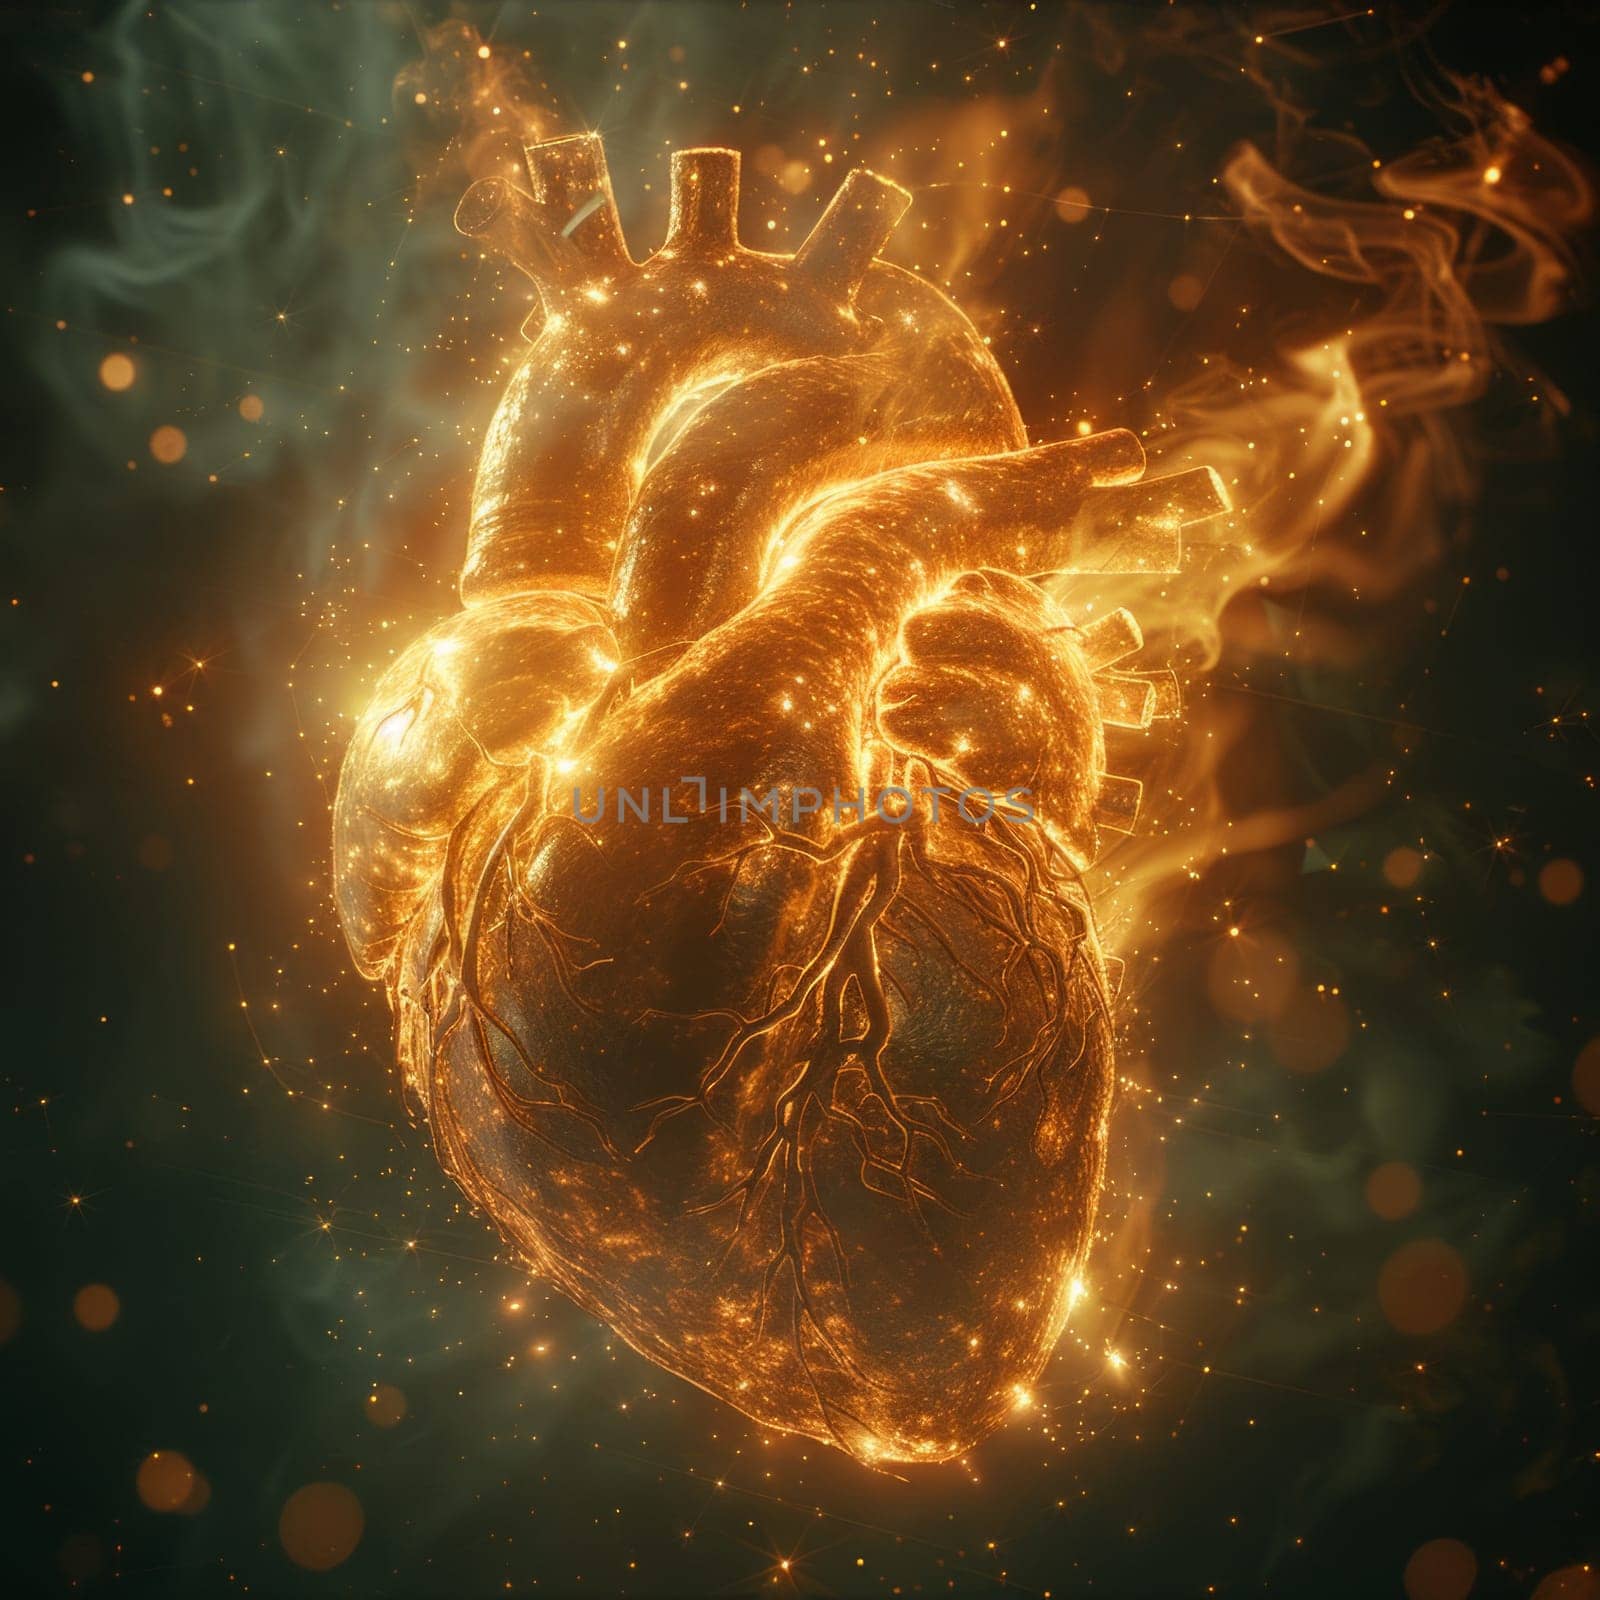 A heart engulfed in flames against a black background, radiating warmth and passion by but_photo